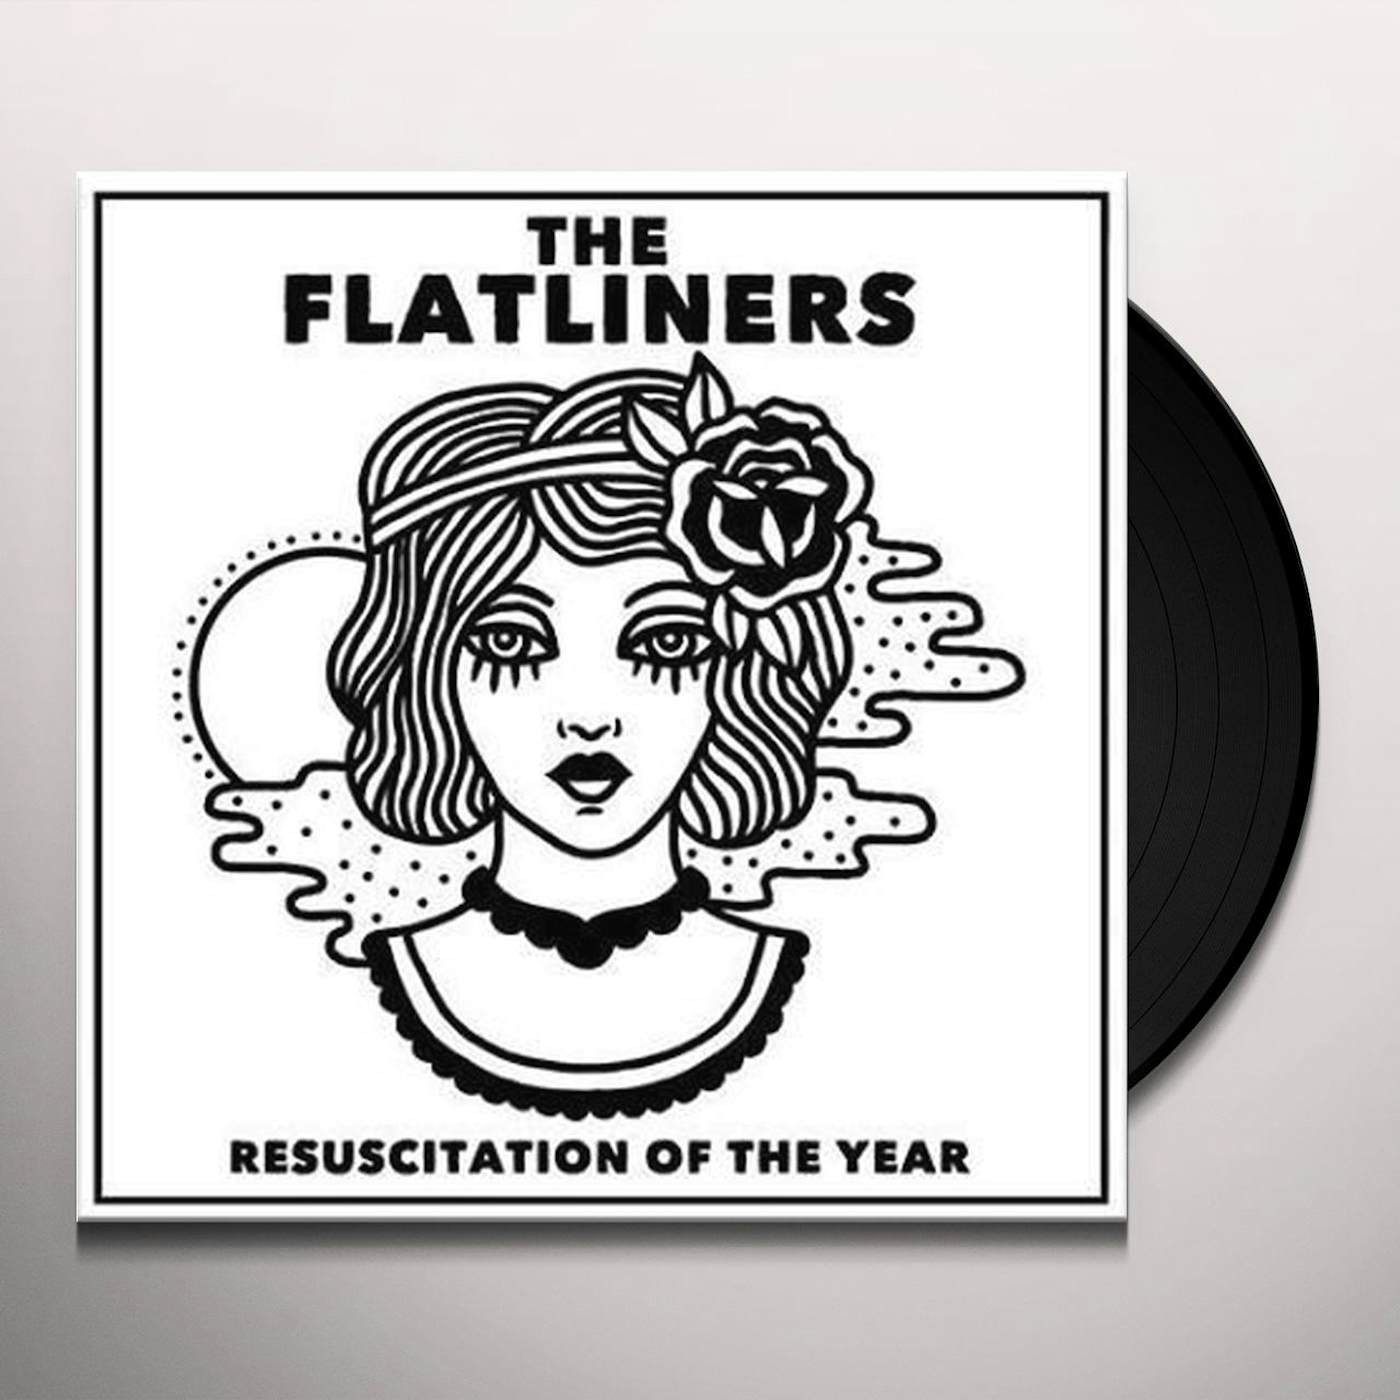 The Flatliners Resuscitation of the Year Vinyl Record